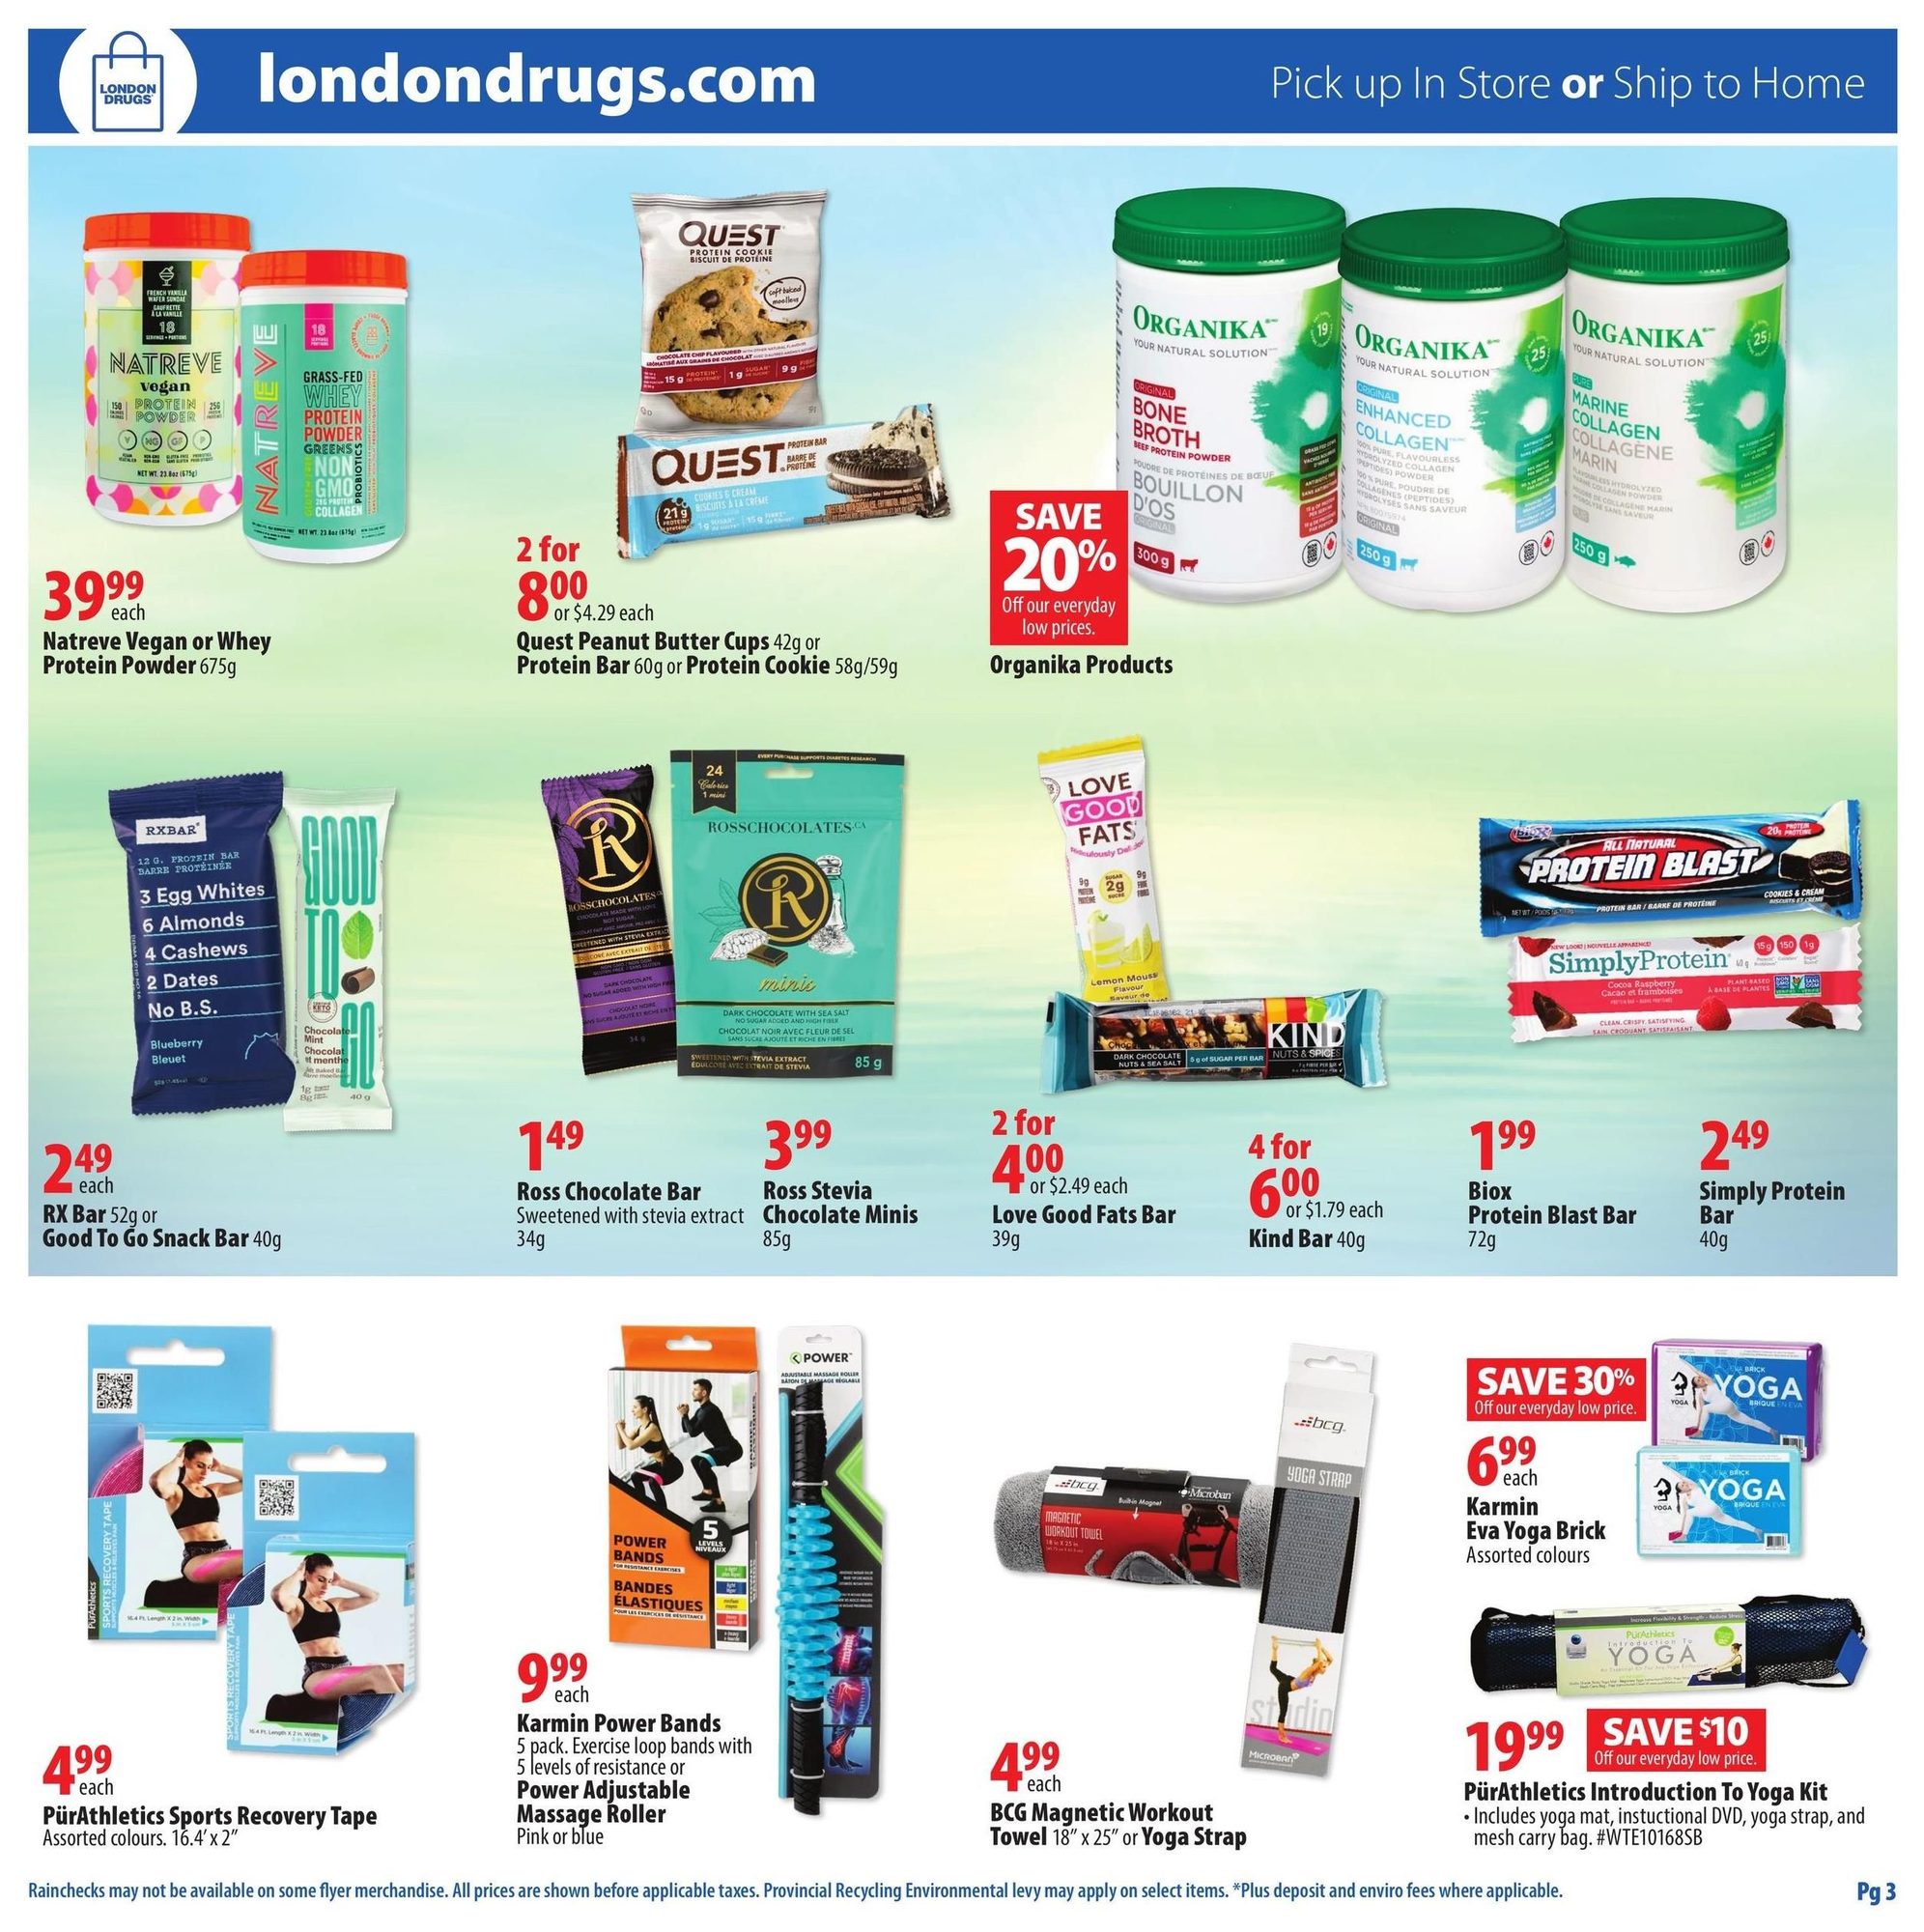 London Drugs - Healthy Savings Event - Page 3